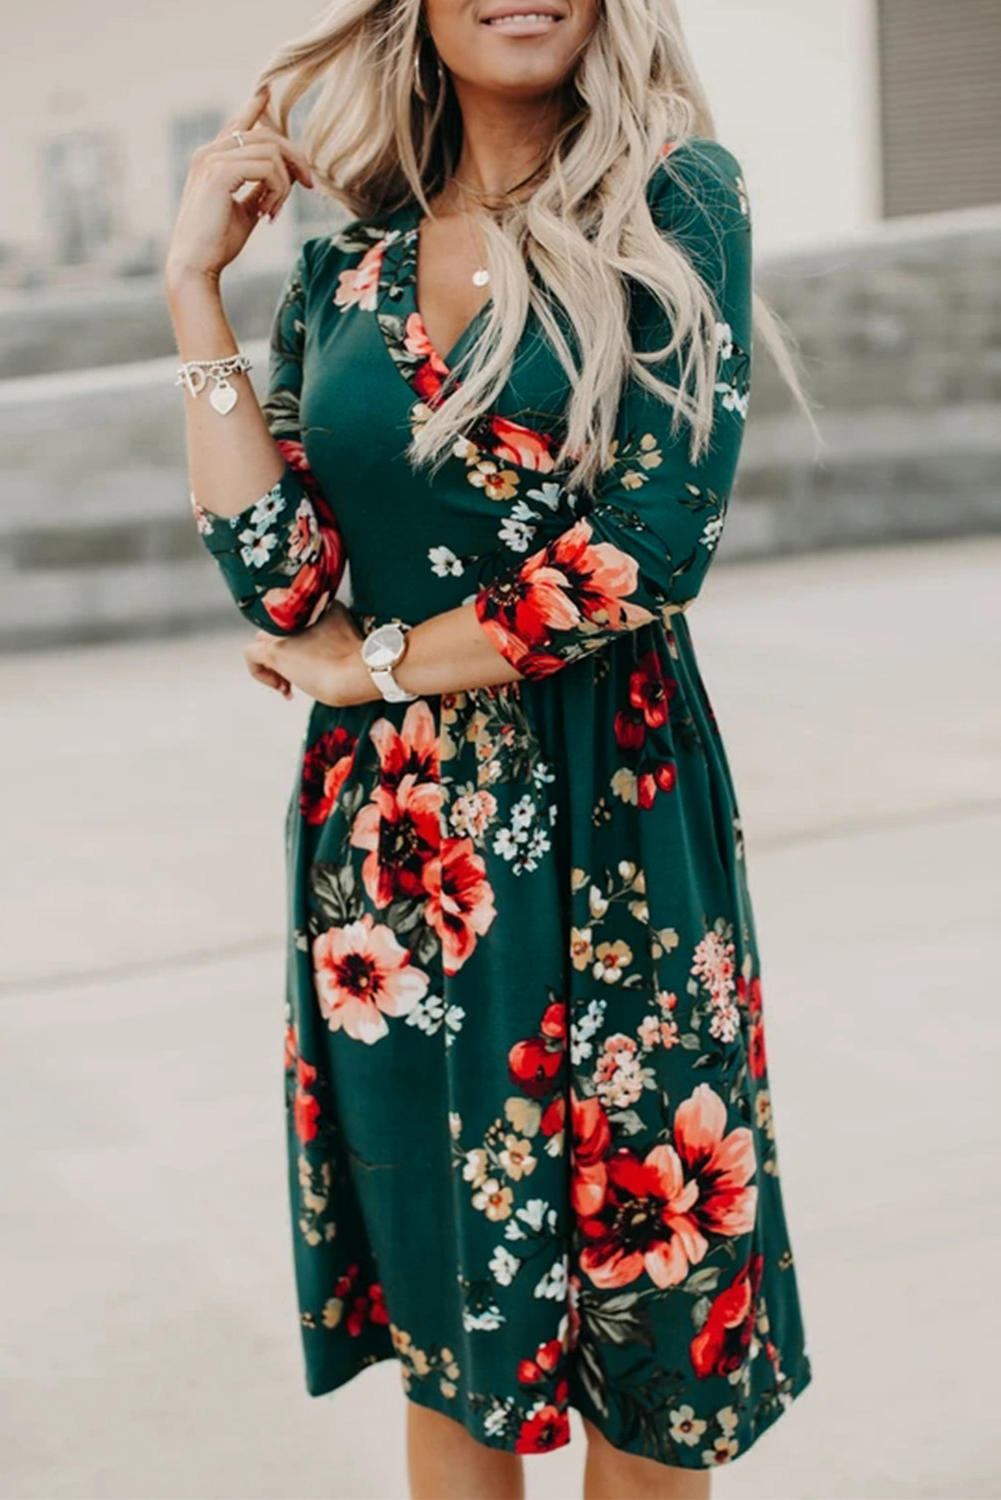 Green Floral 3/4 Sleeve Wrap Dress - (US 4-6)S